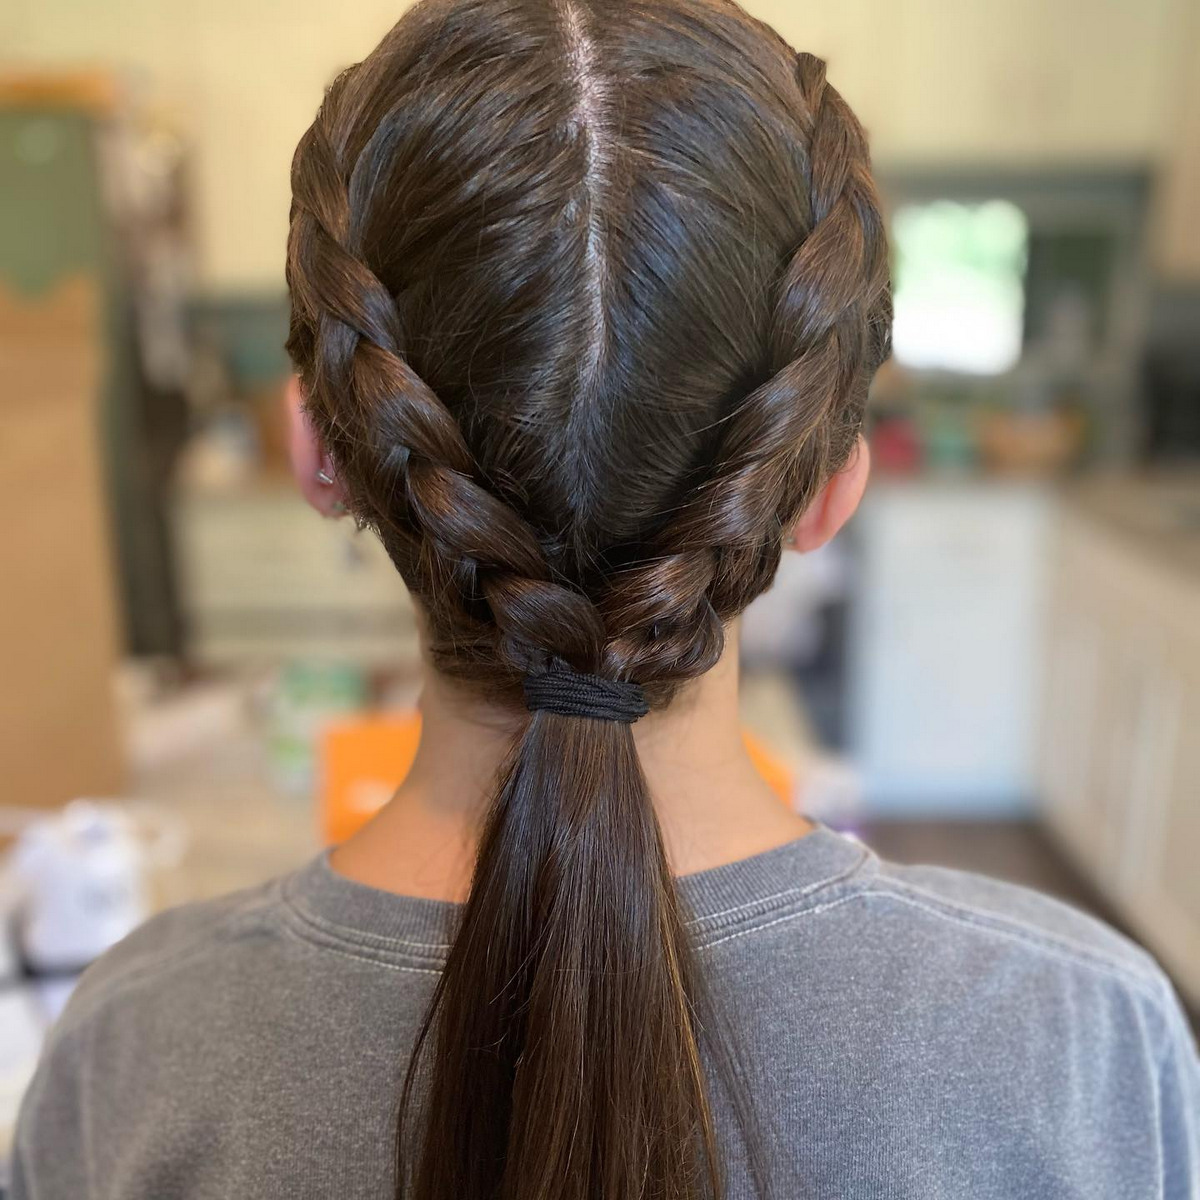 Ponytail Hair With Side Braids